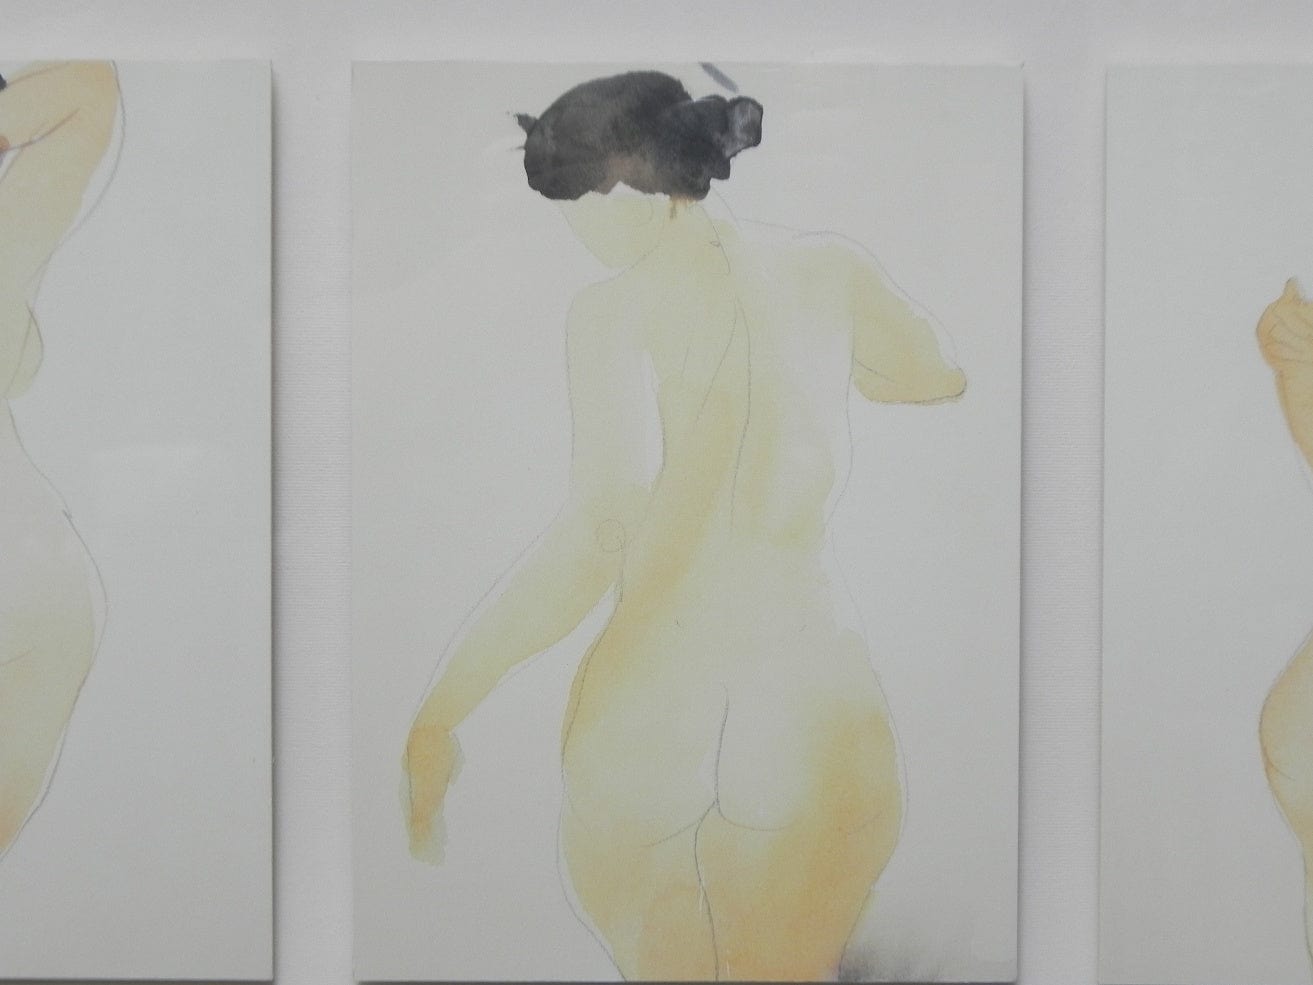 I Like Mike's Mid Century Modern Wall Decor & Art Nude Japanese Watercolor Series Framed in Shadow Box, Linderas